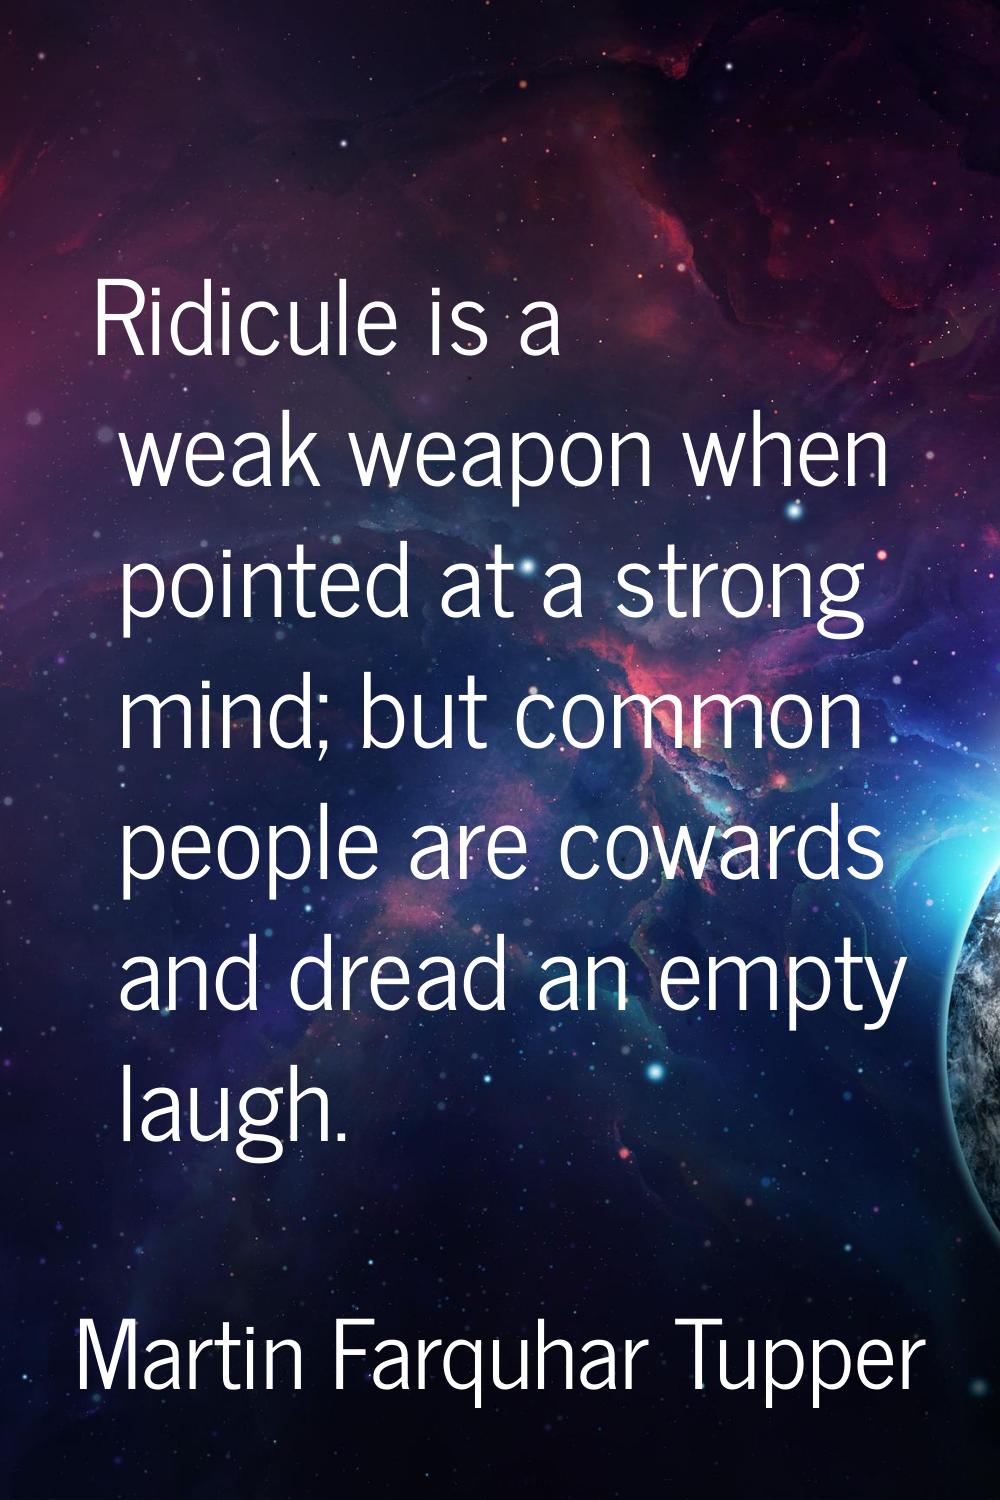 Ridicule is a weak weapon when pointed at a strong mind; but common people are cowards and dread an